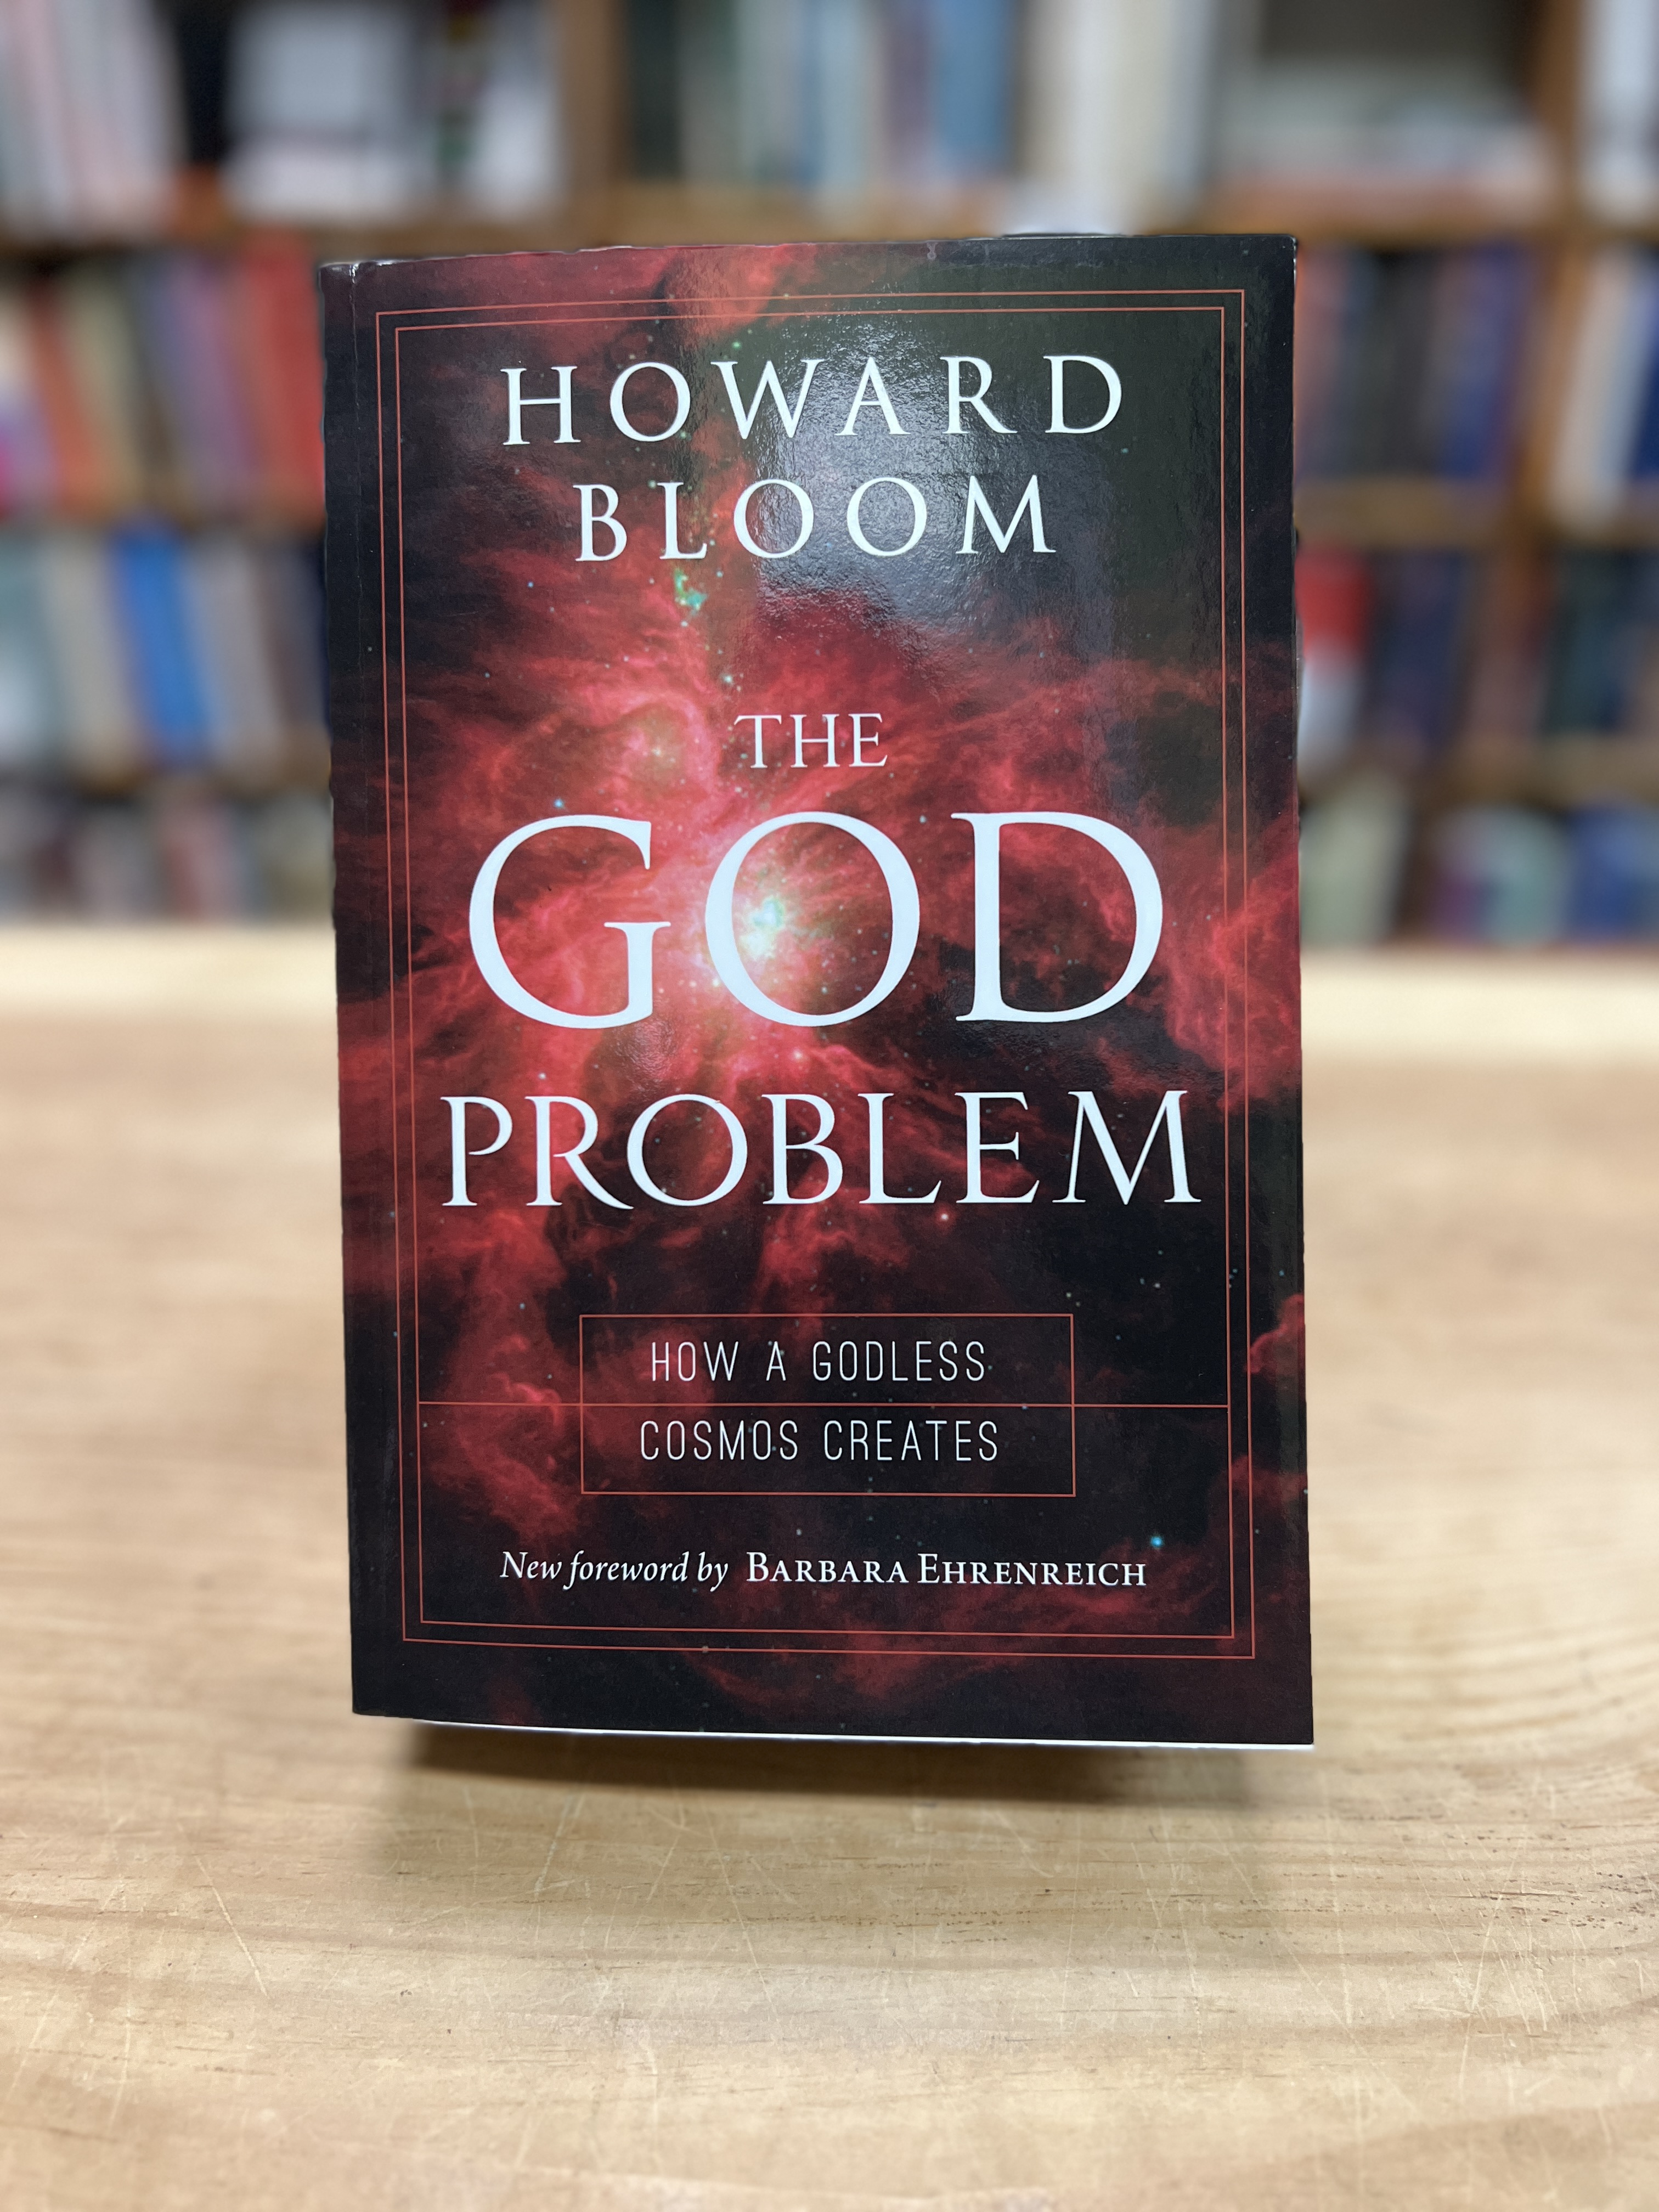 Image for "The God Problem, How a Godless Cosmos Creates"